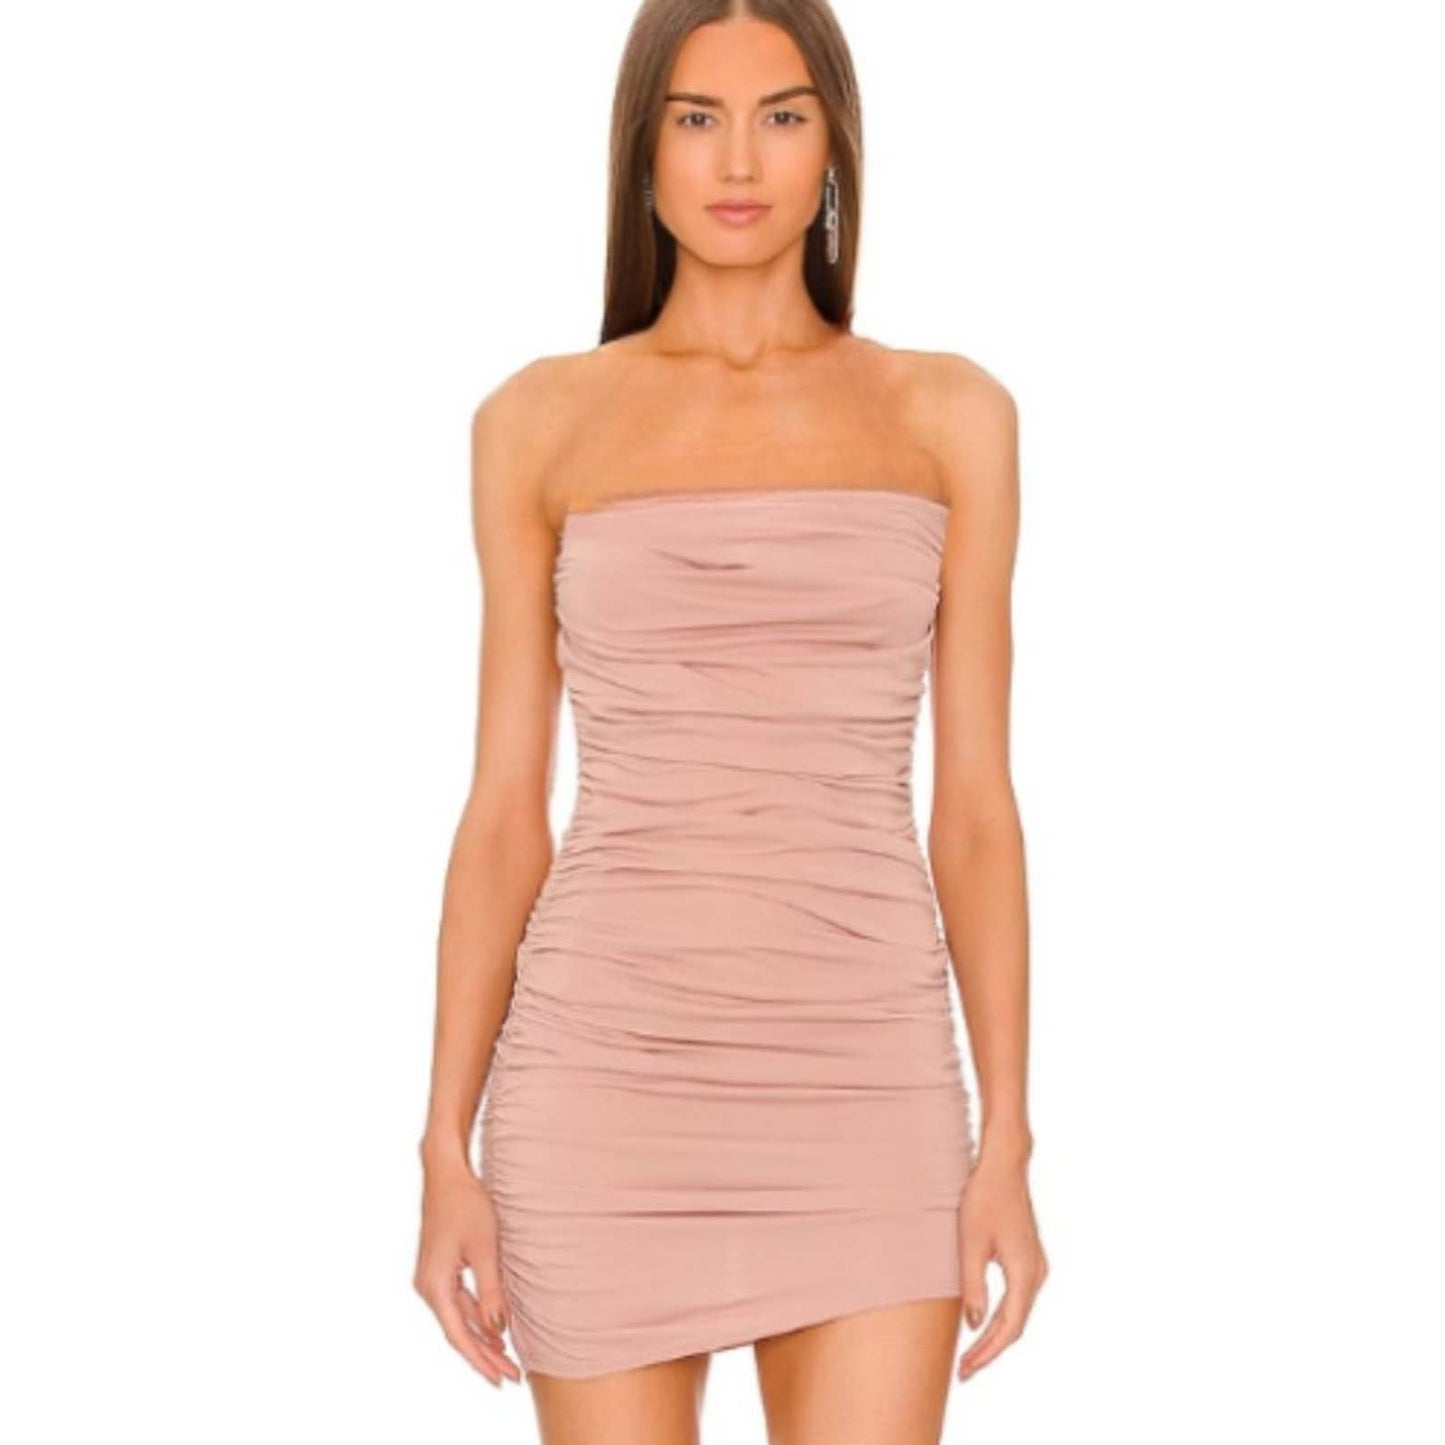 Michael Costello Julianna Ruched Mini Dress in Rose' NWT Size Small